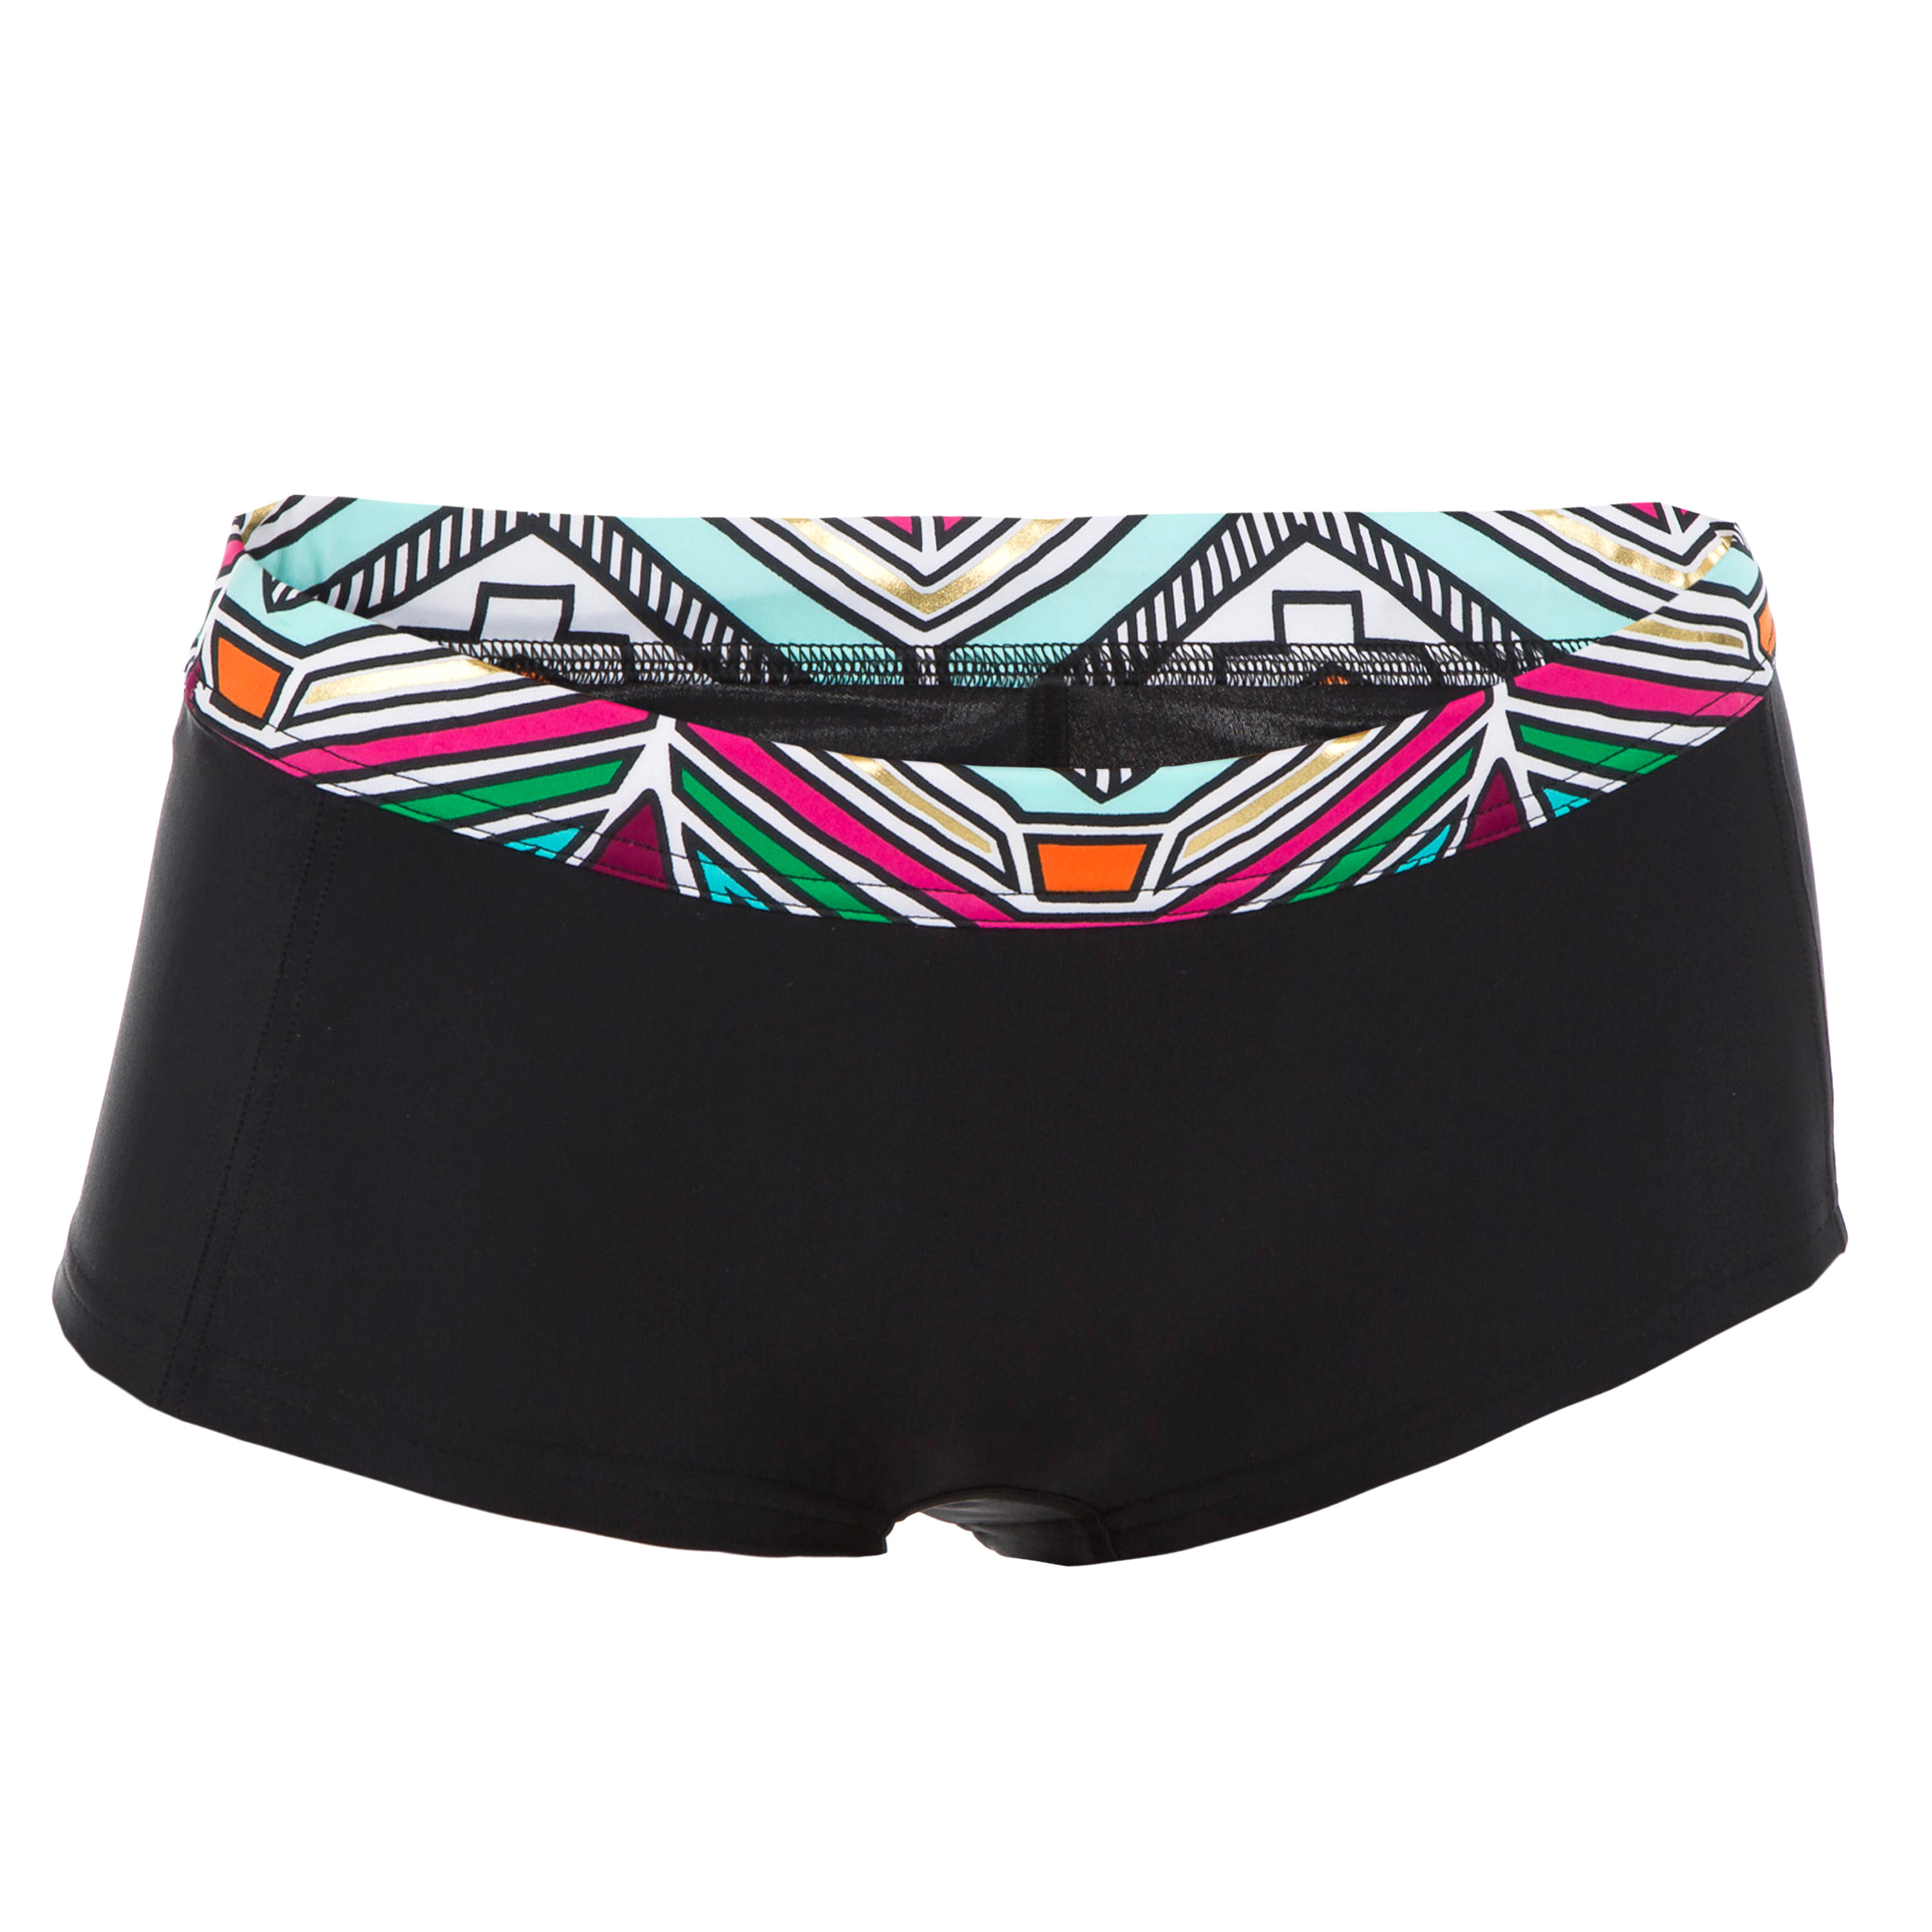 OLAIAN VAIANA Women's Surfing Shorty Swimsuit Bottoms WITH DRAWSTRING - NCOLO